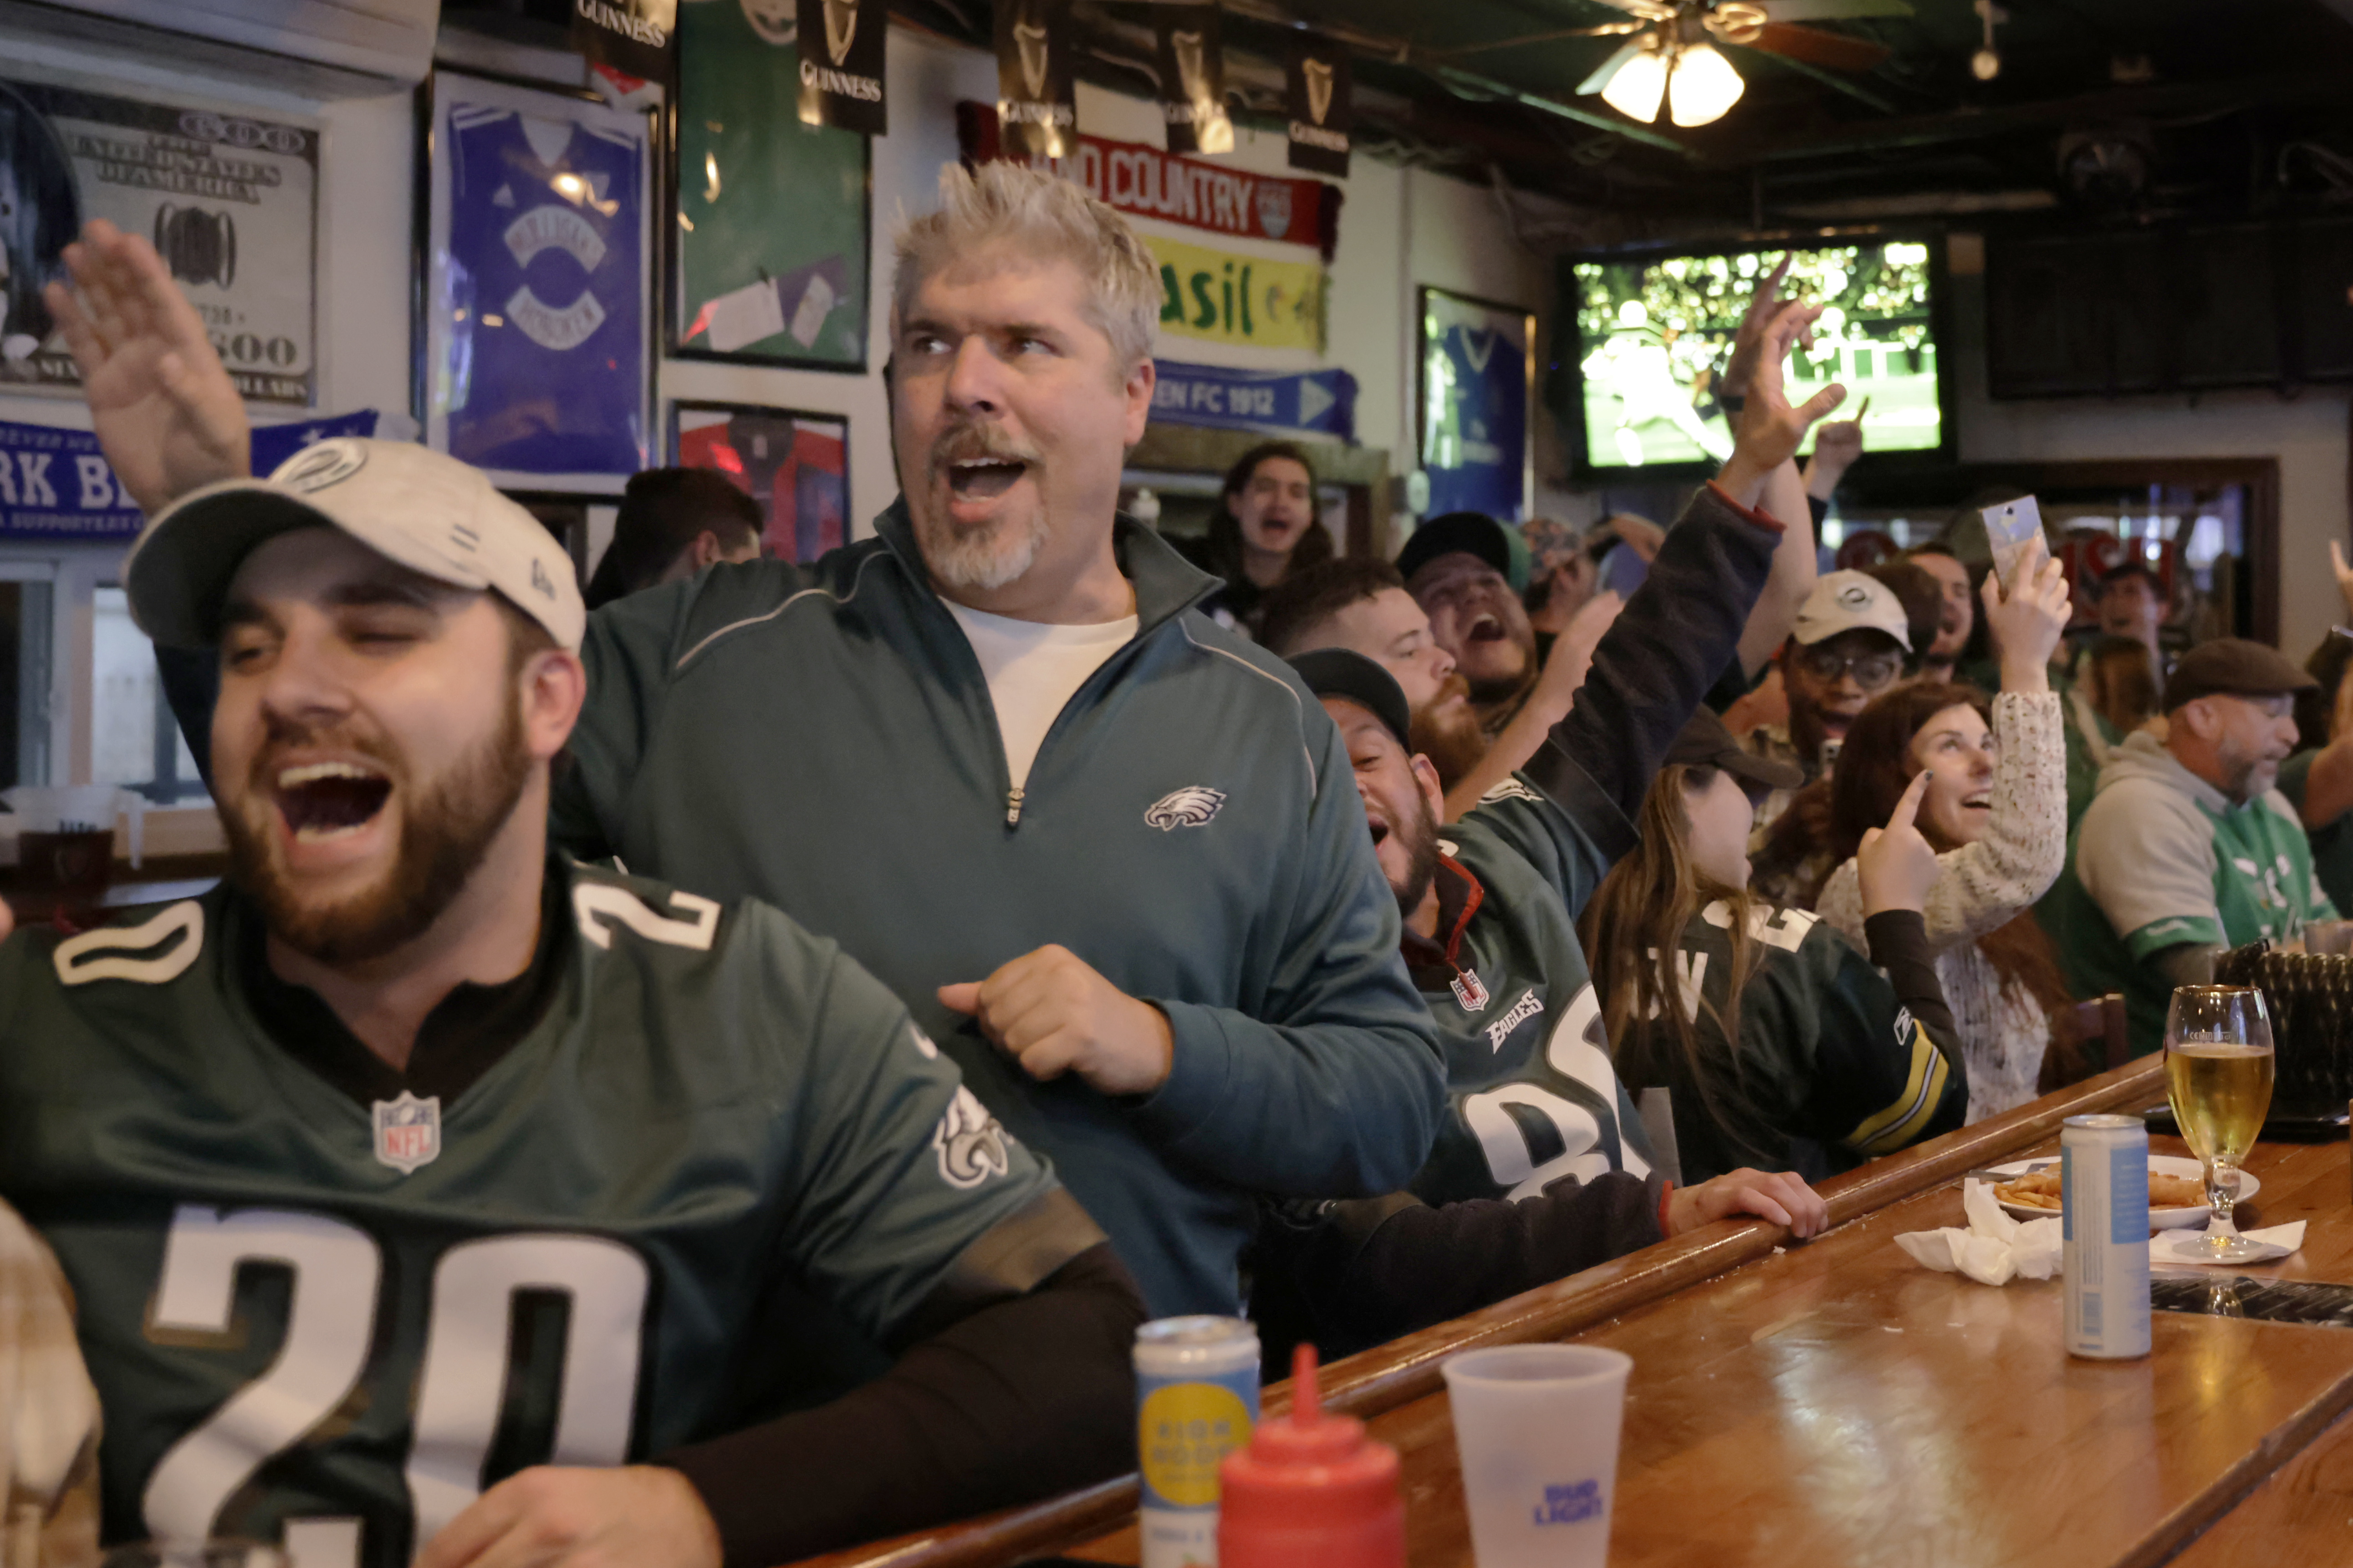 Giants fan looking for a bar to watch the game in Philly gets